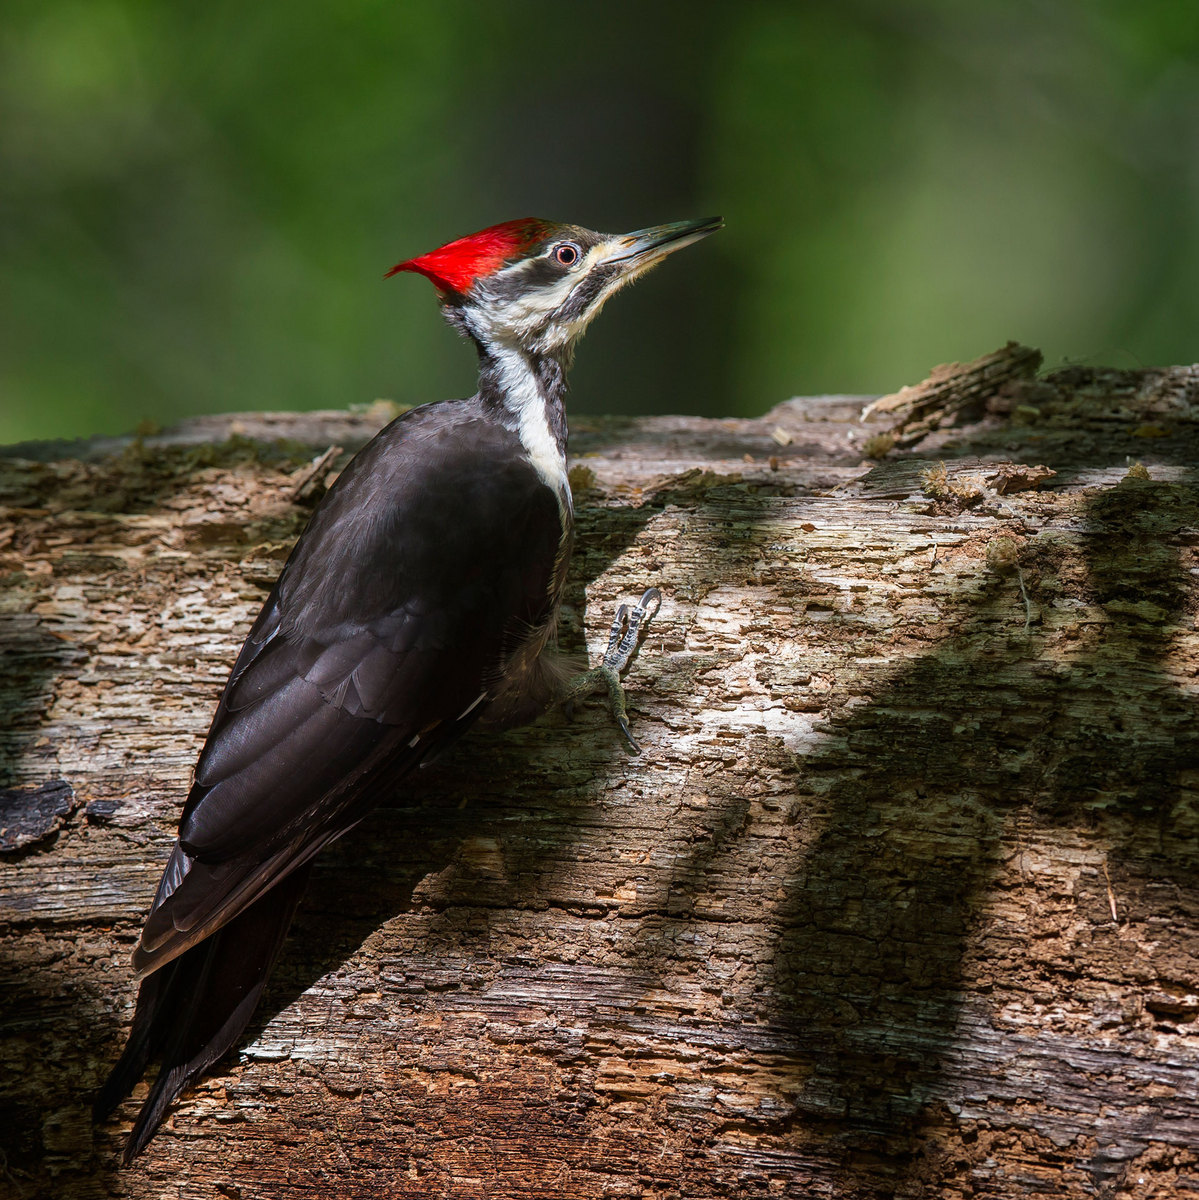 A female Pileated Woodpecker poses for me after landing on a rotting tree trunk.

District of Columbia 
Rock Creek Park "Maintenance Yard"

May 2015